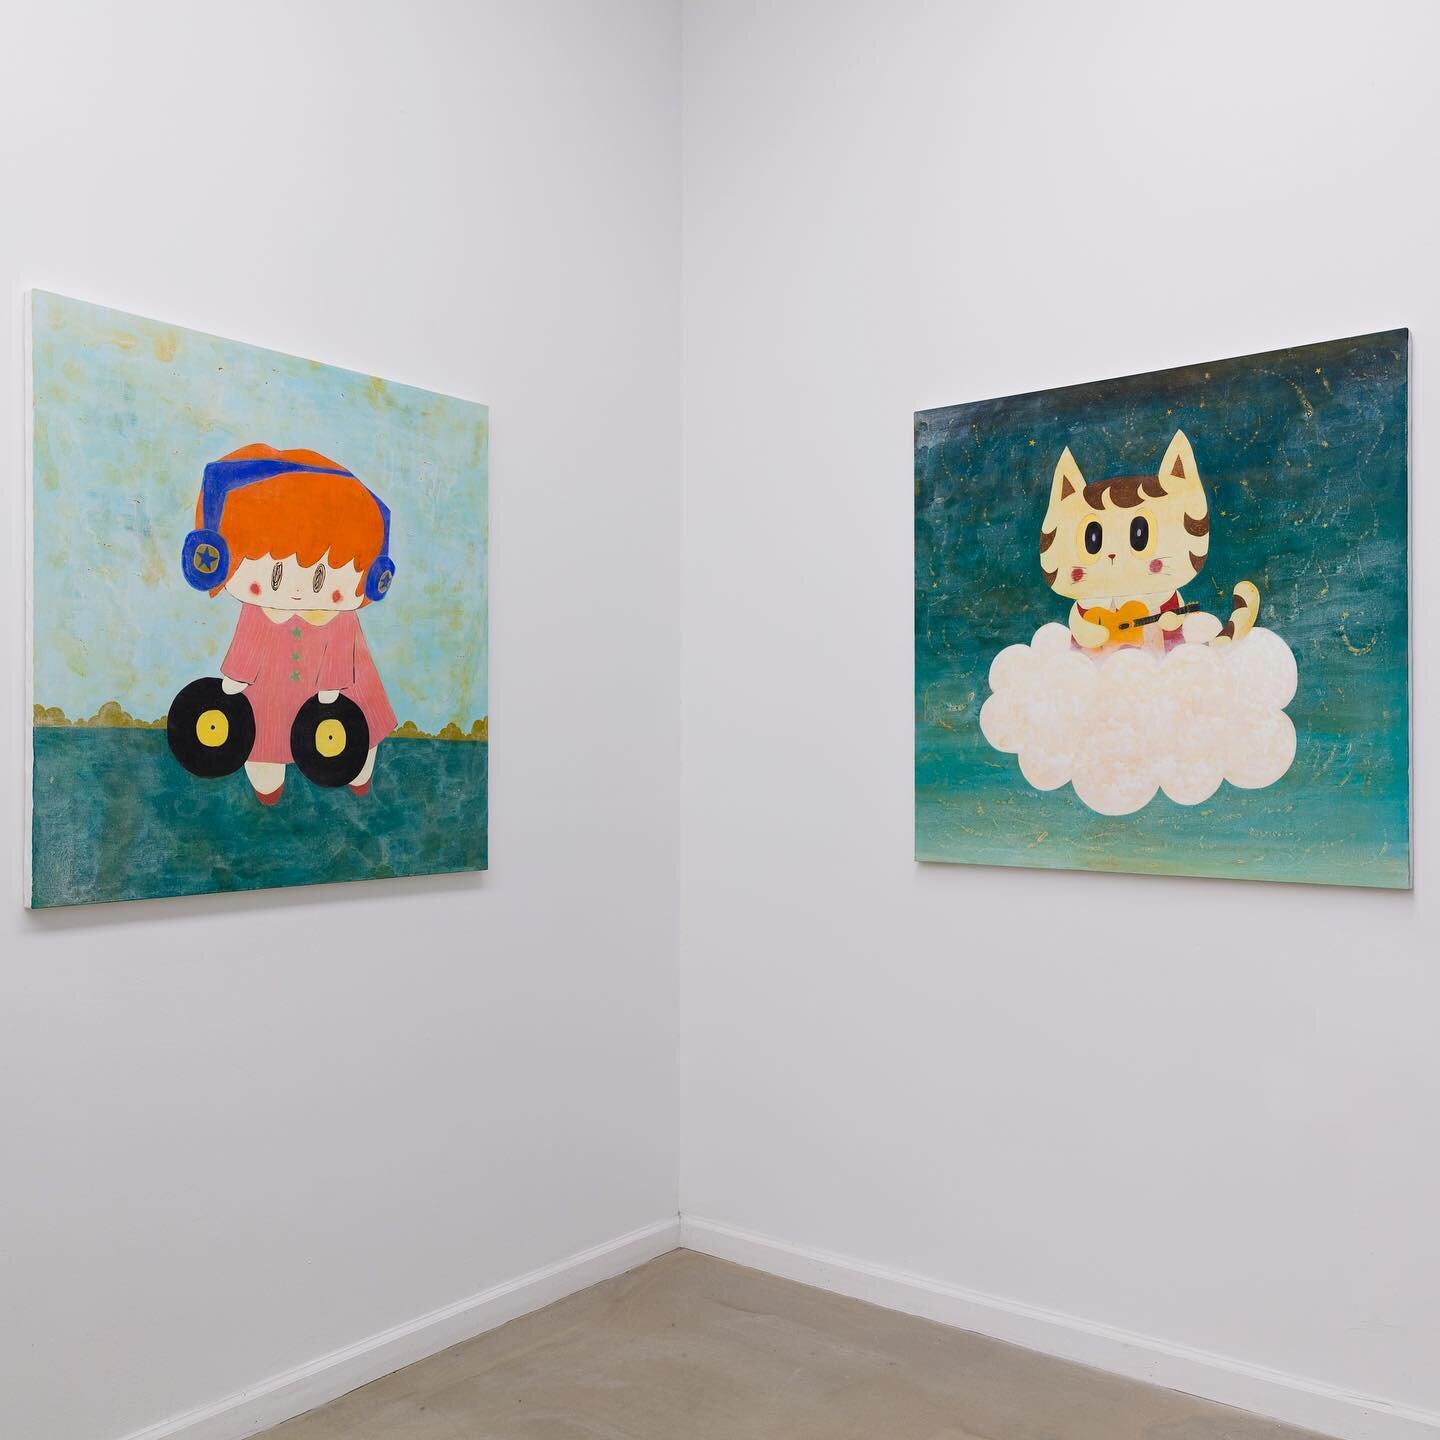 Noritoshi Mitsuuchi
Listen II

The exhibition has been extended and will now close on Sunday, May 7th.

Pictured:

Left: 
DJ Boy 
Acrylic on canvas 
39.40h x 39.40w in

Right:
Guitar Cat M
Acrylic on canvas
39.40h x 39.40w in

#ATMGalleryNYC #Noritos